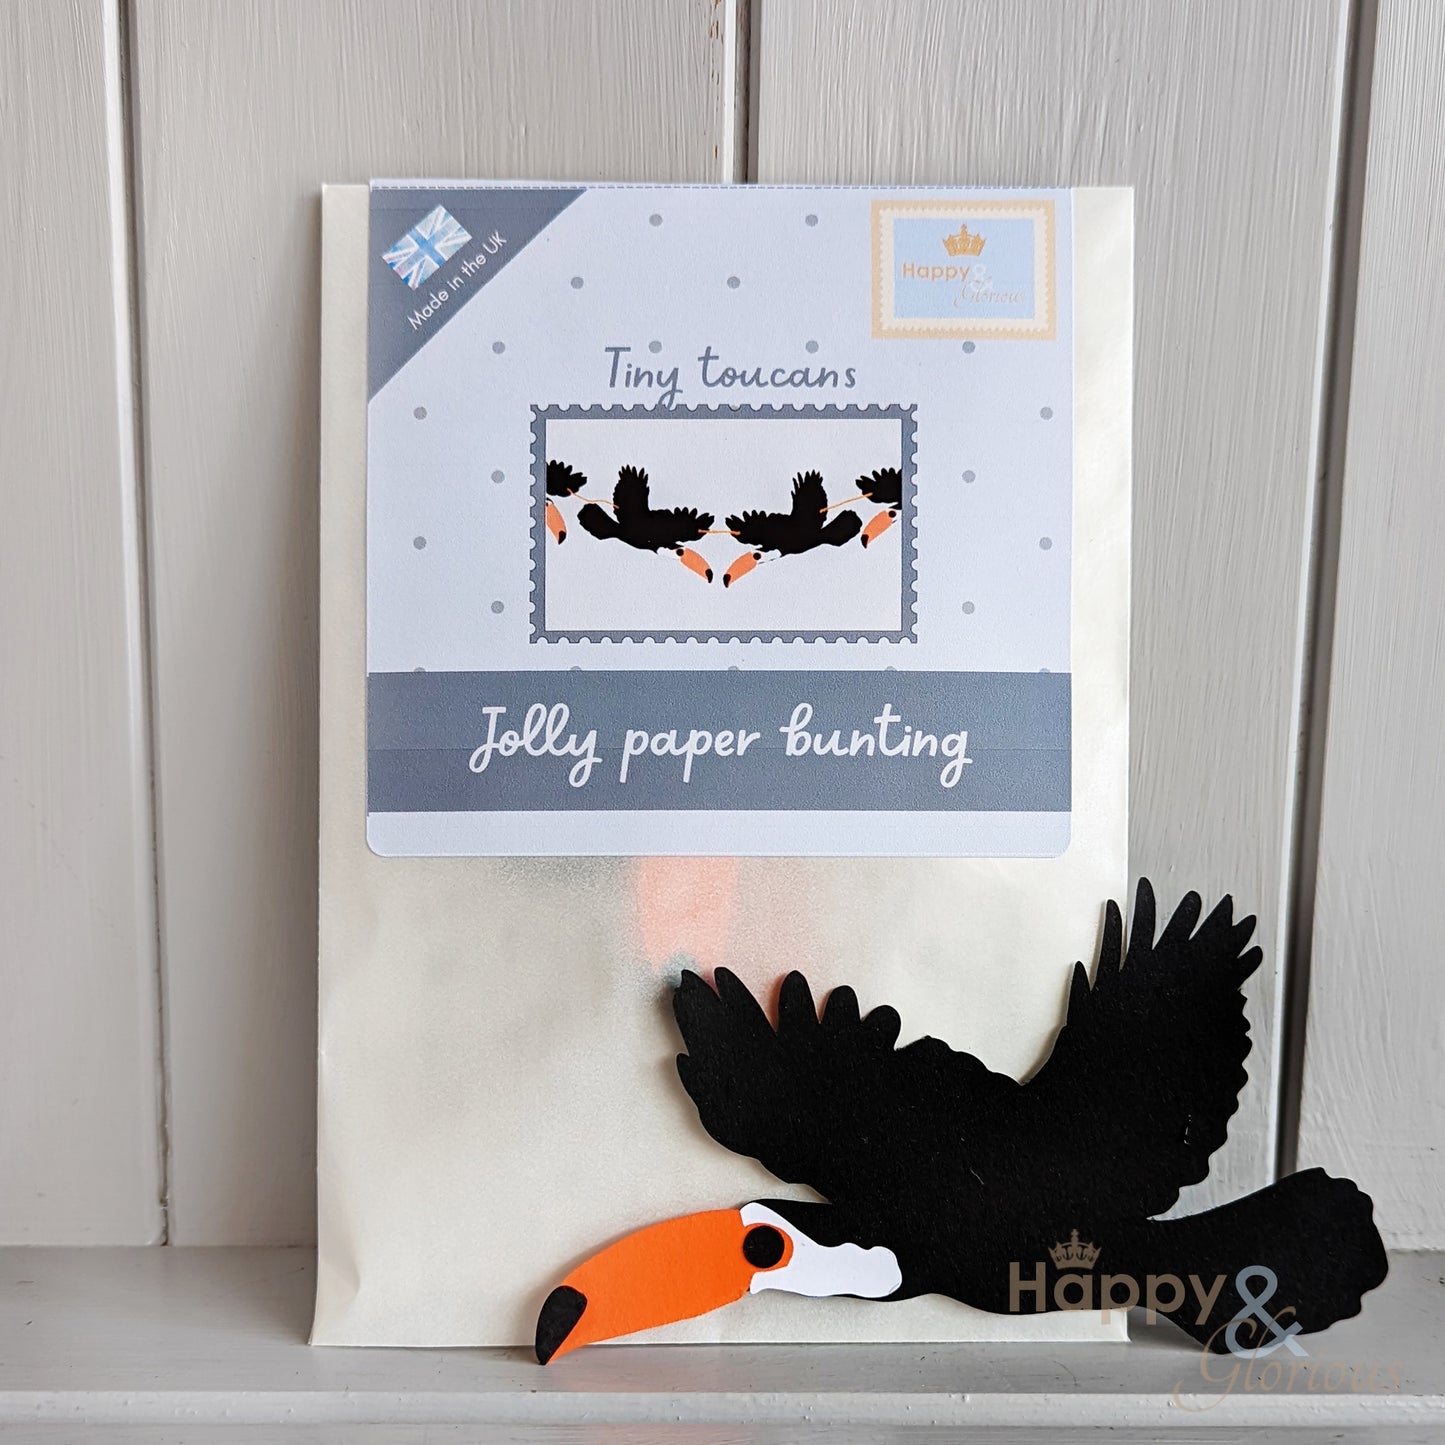 Jolly paper bunting - tiny toucans